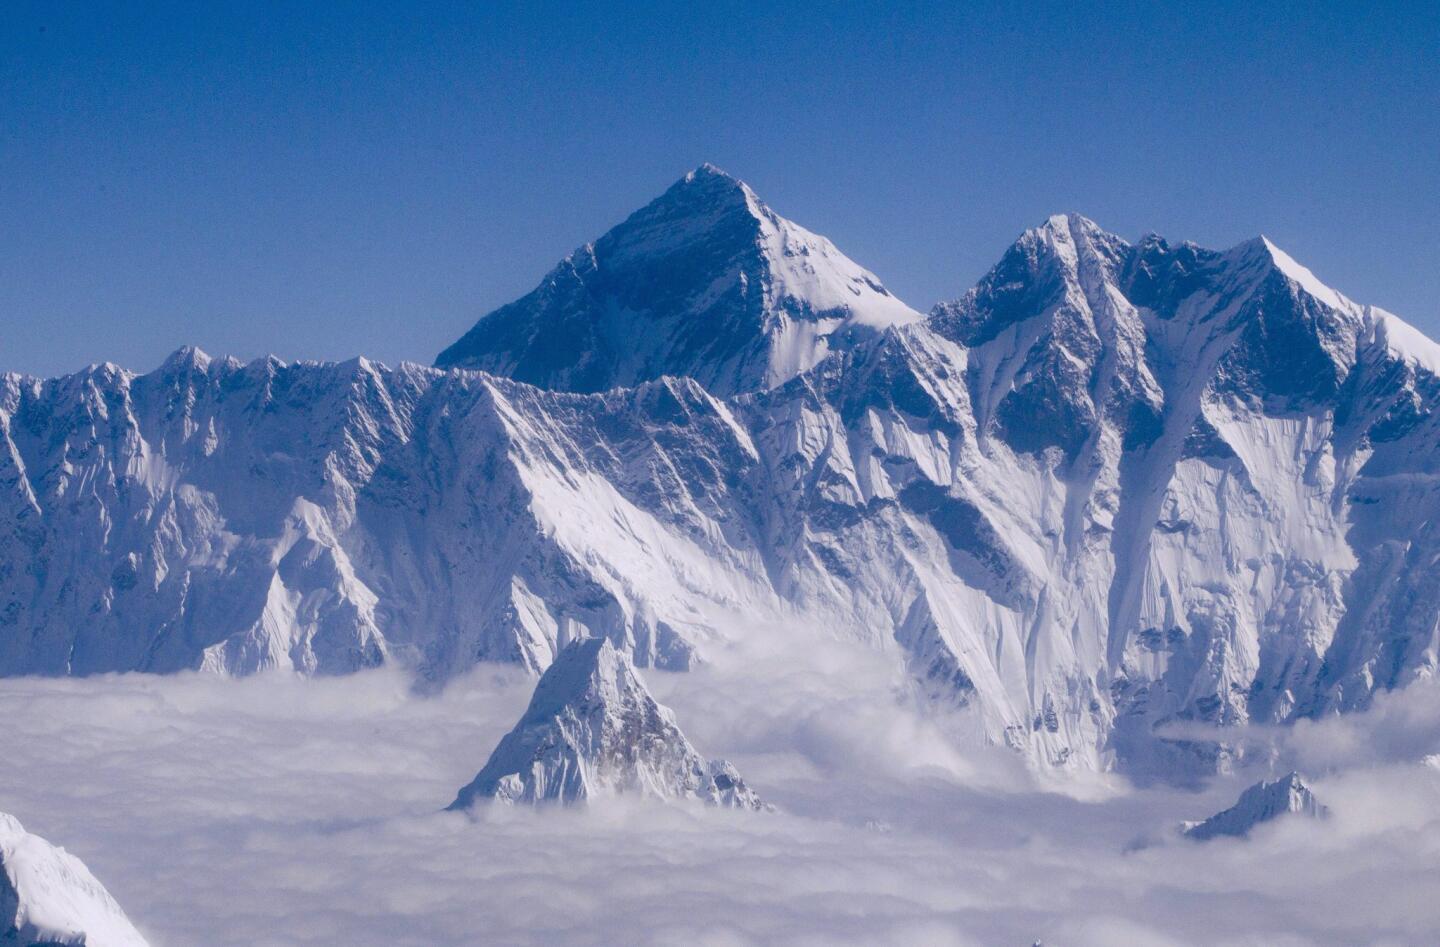 Avalanche on Mt. Everest